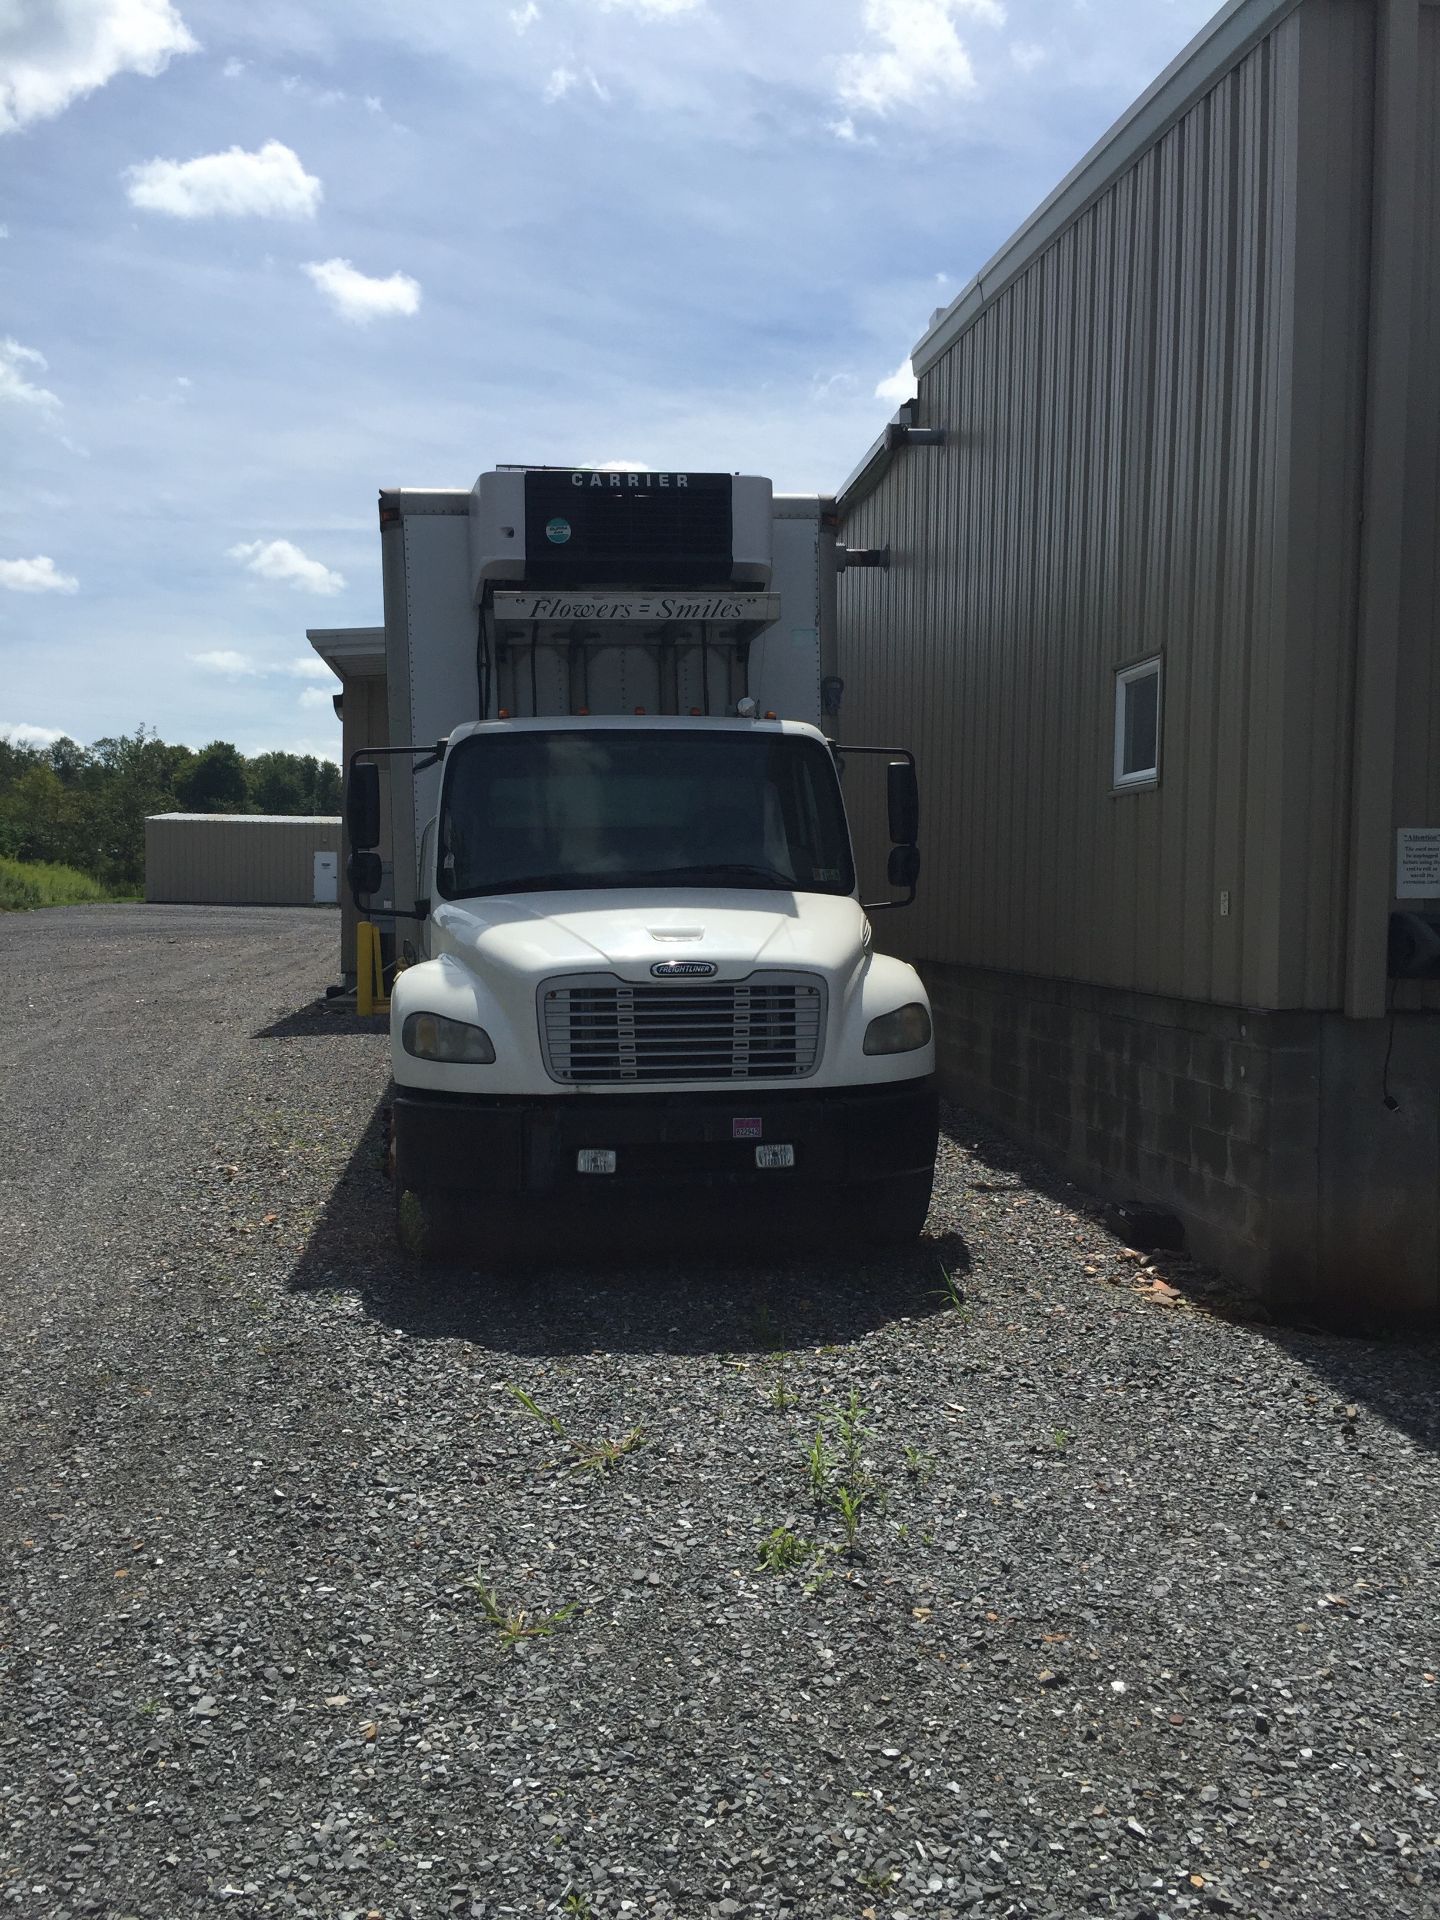 Freightliner Delivery Truck w/ Refrigerated Trailer, VIN 1FVACWDCX6HW49466 Located in St. Mary's, PA - Image 2 of 2